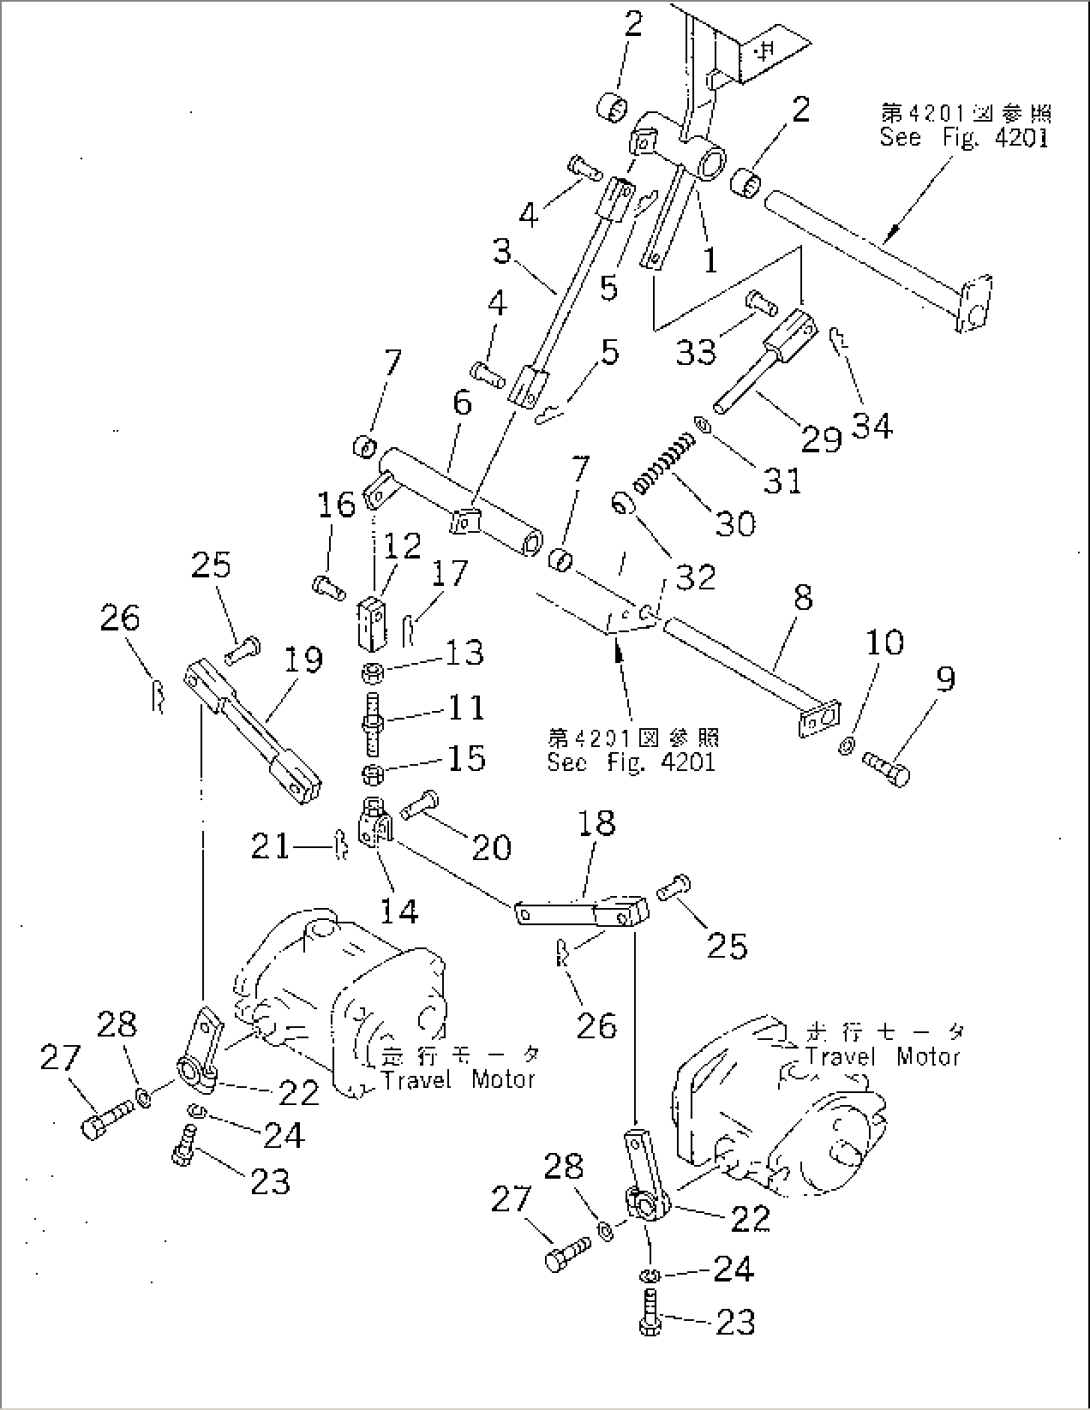 SPEED CONTROL PEDAL AND LINKAGE